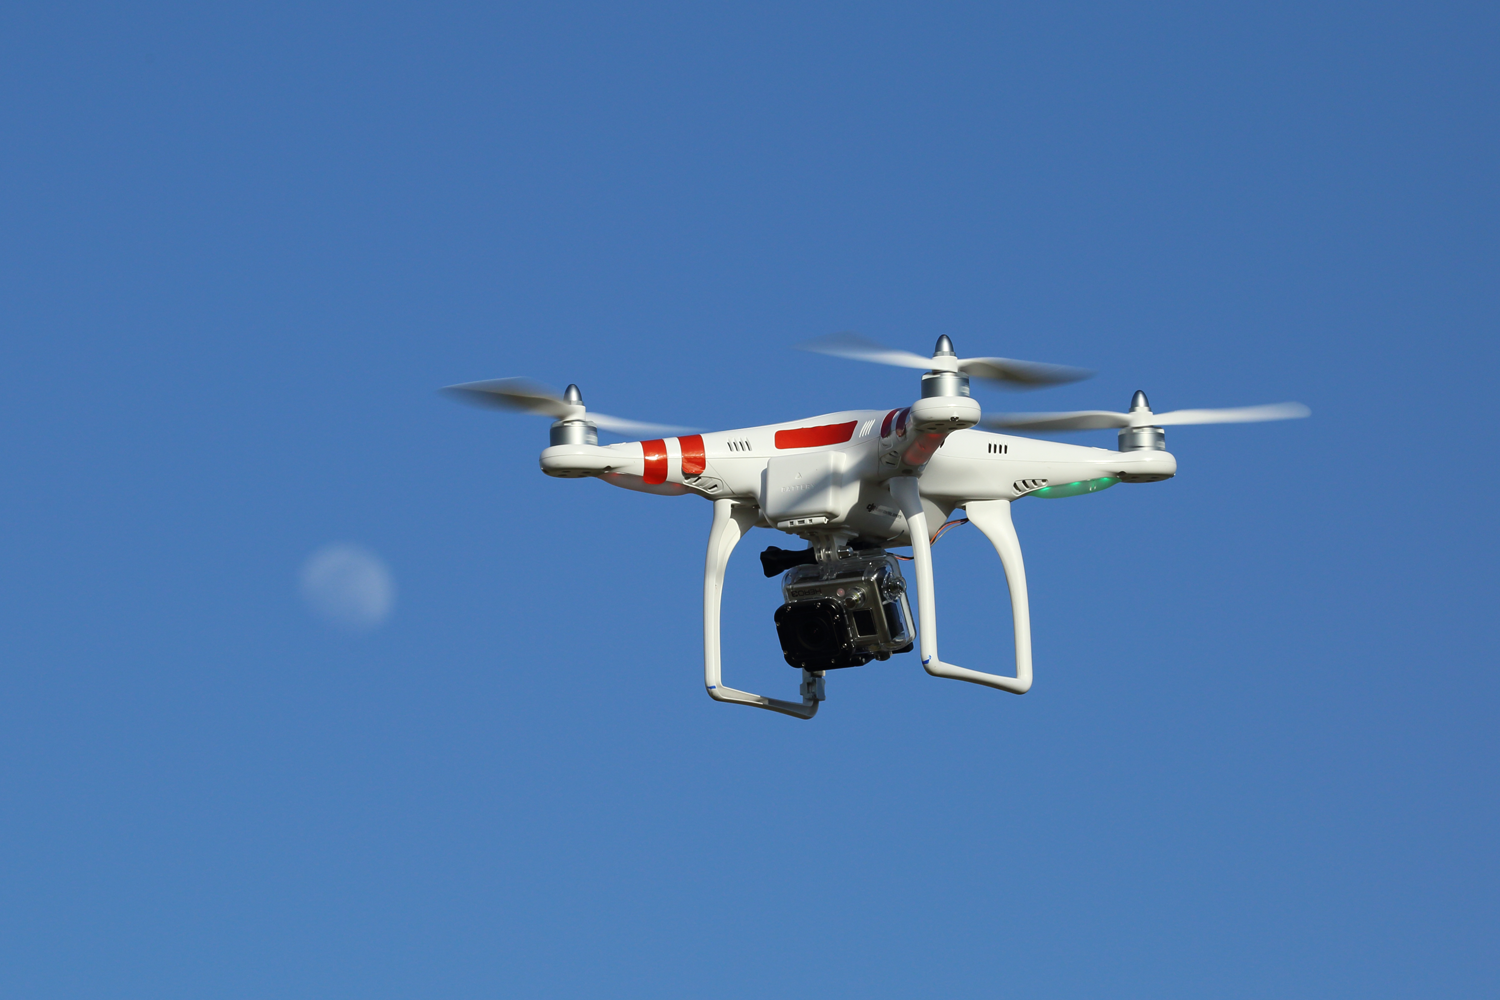 paparazzi camera drones slapped with ban in california best drone vids header